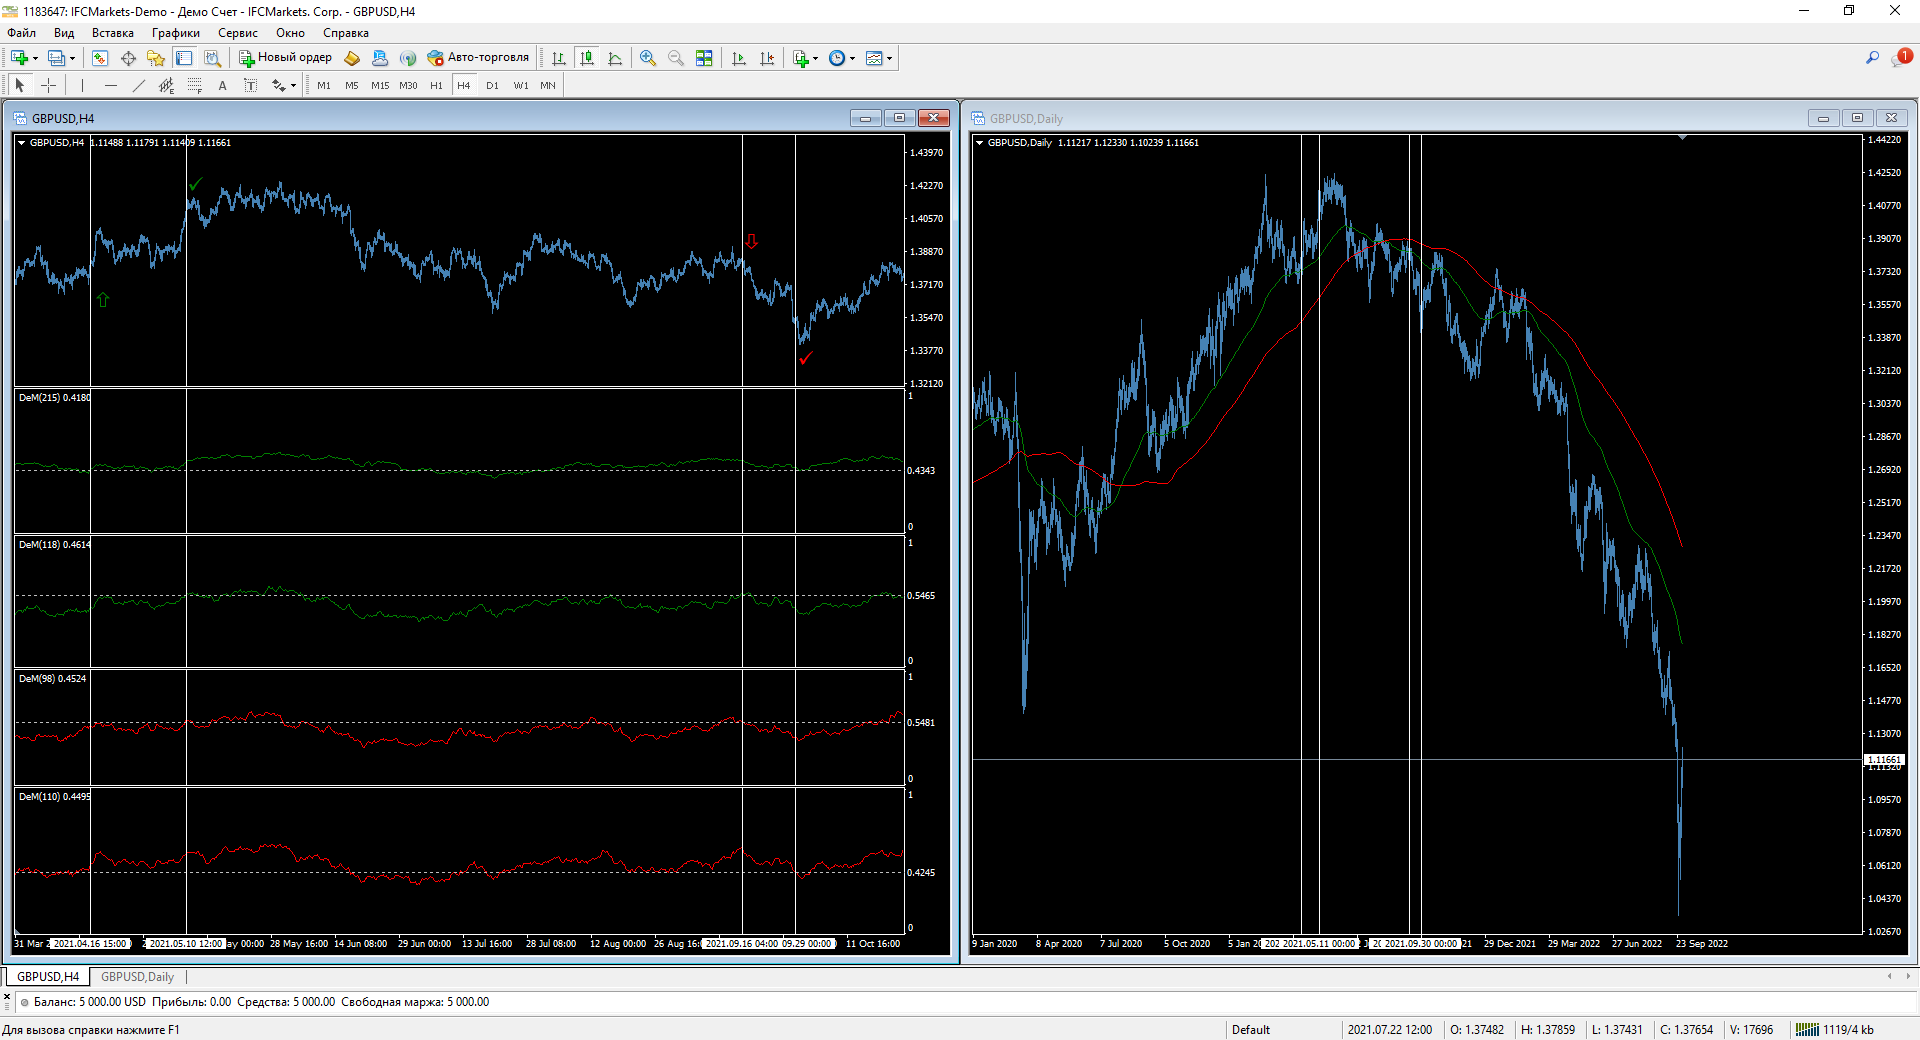 gbpusd-h4-ifcmarkets-corp-3.png